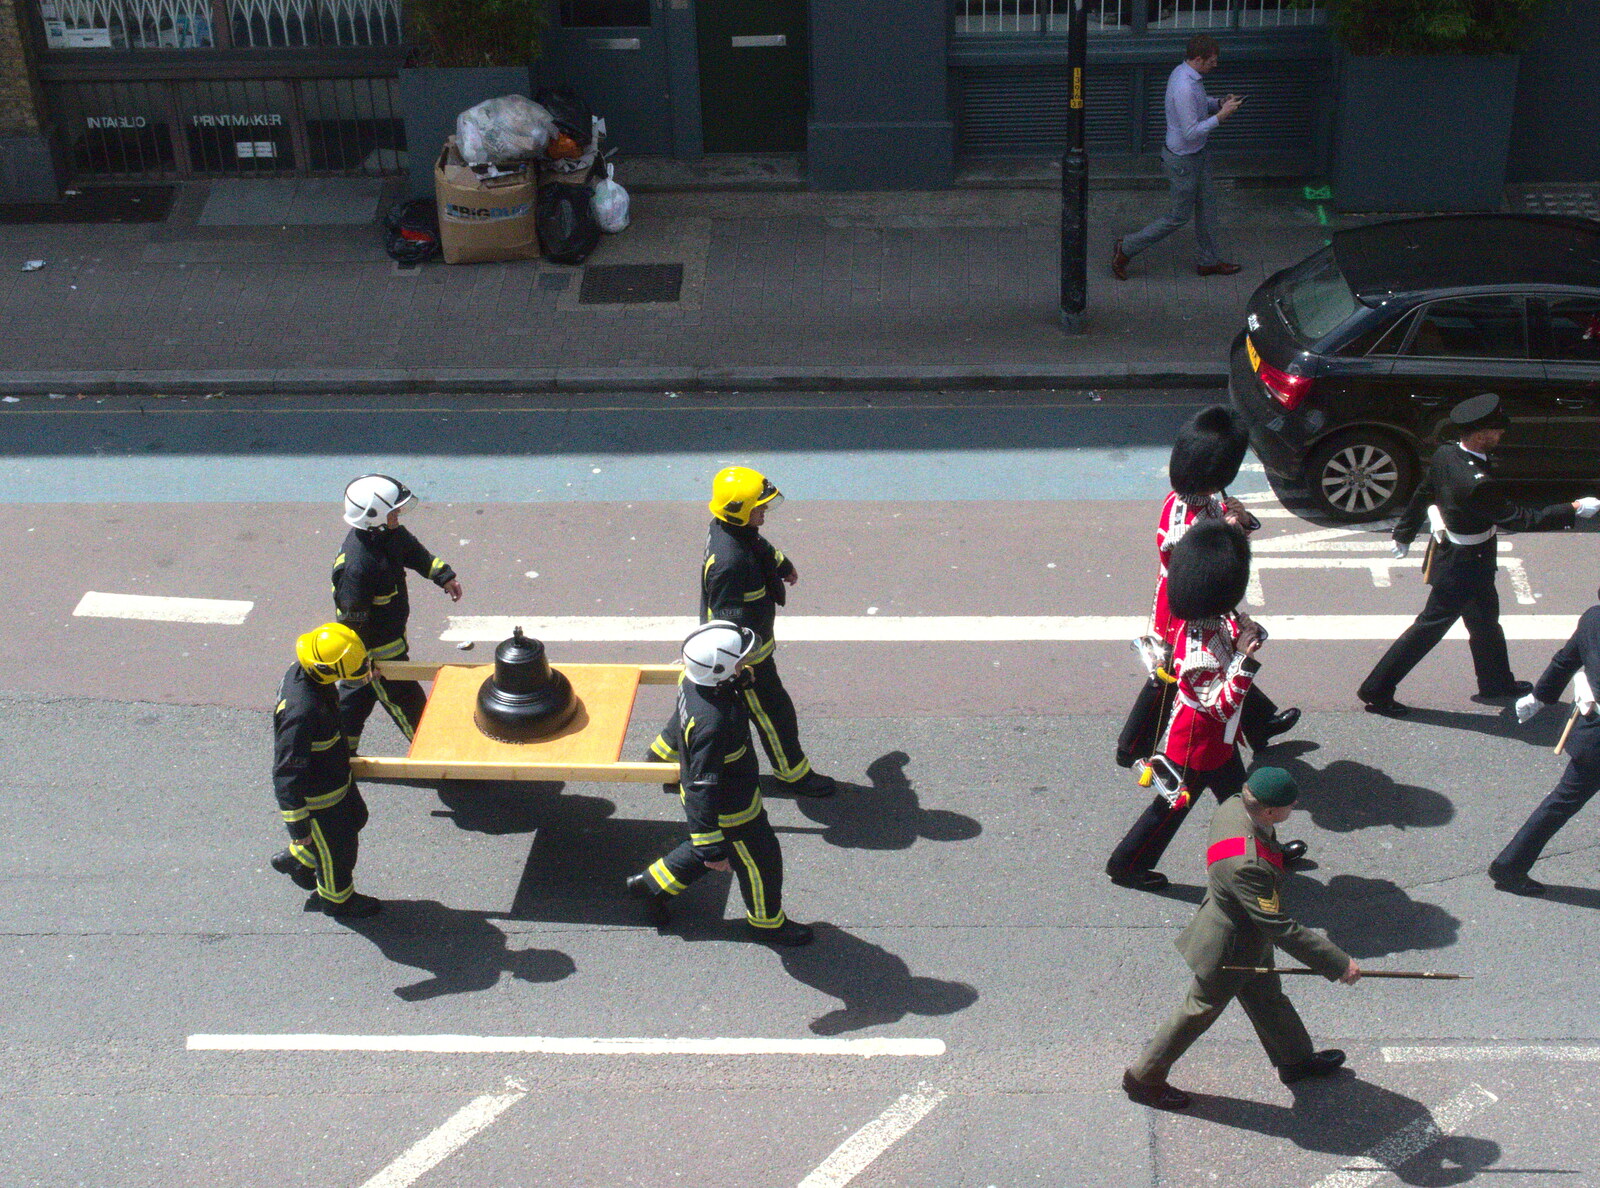 The firemen carry a bell from Harry's Sports Day and a London March, Southwark and Eye, Suffolk - 7th July 2016